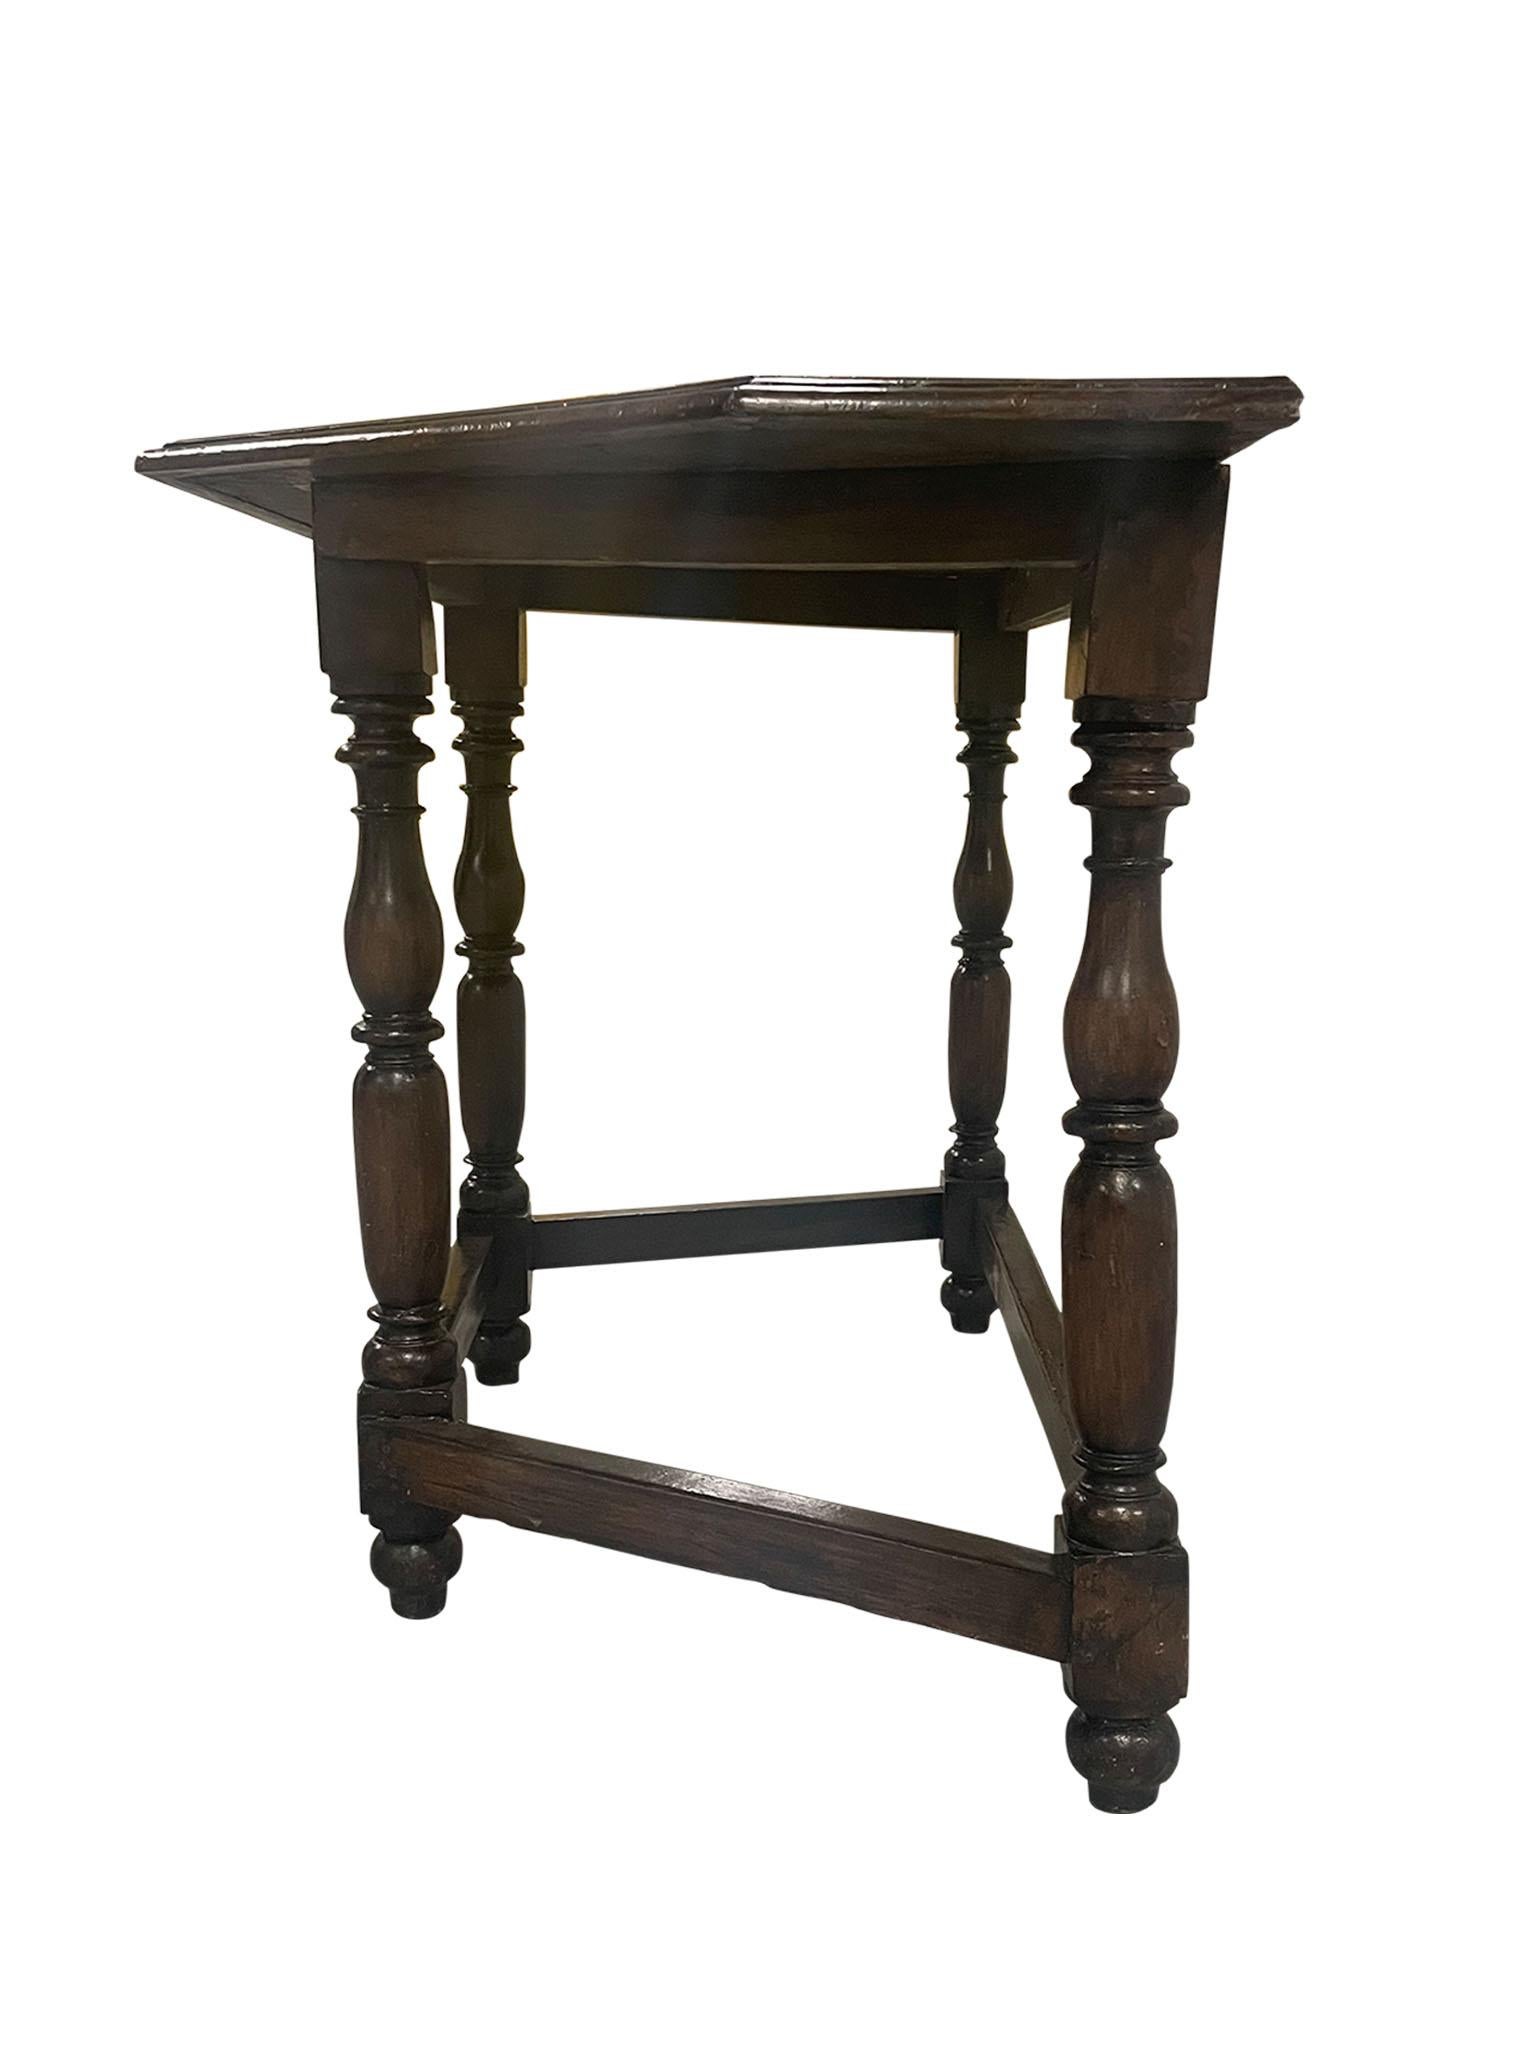 Lovely 19th Century Italian Trapezoid or “D” Shaped Console Table. Crafted in a rich walnut, this table was designed in the Neoclassical style with beautiful turned spindle legs and joined with a sturdy box stretcher. This table is a perfect shape